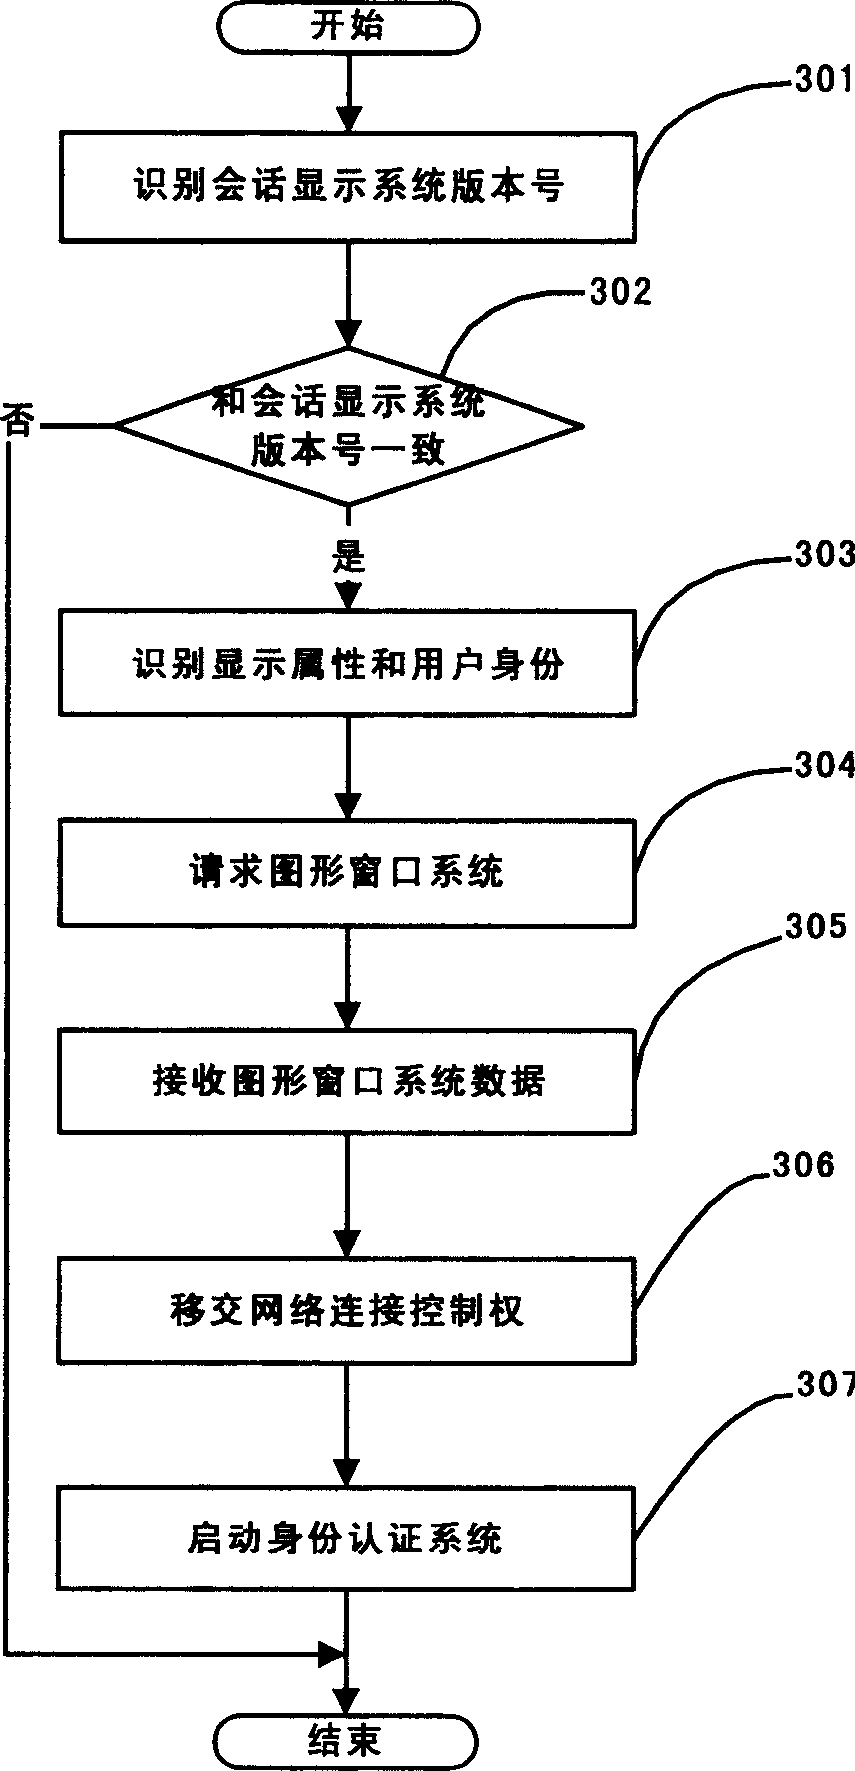 Method and system for automatically creating and managing graphical user interface session of remote terminal